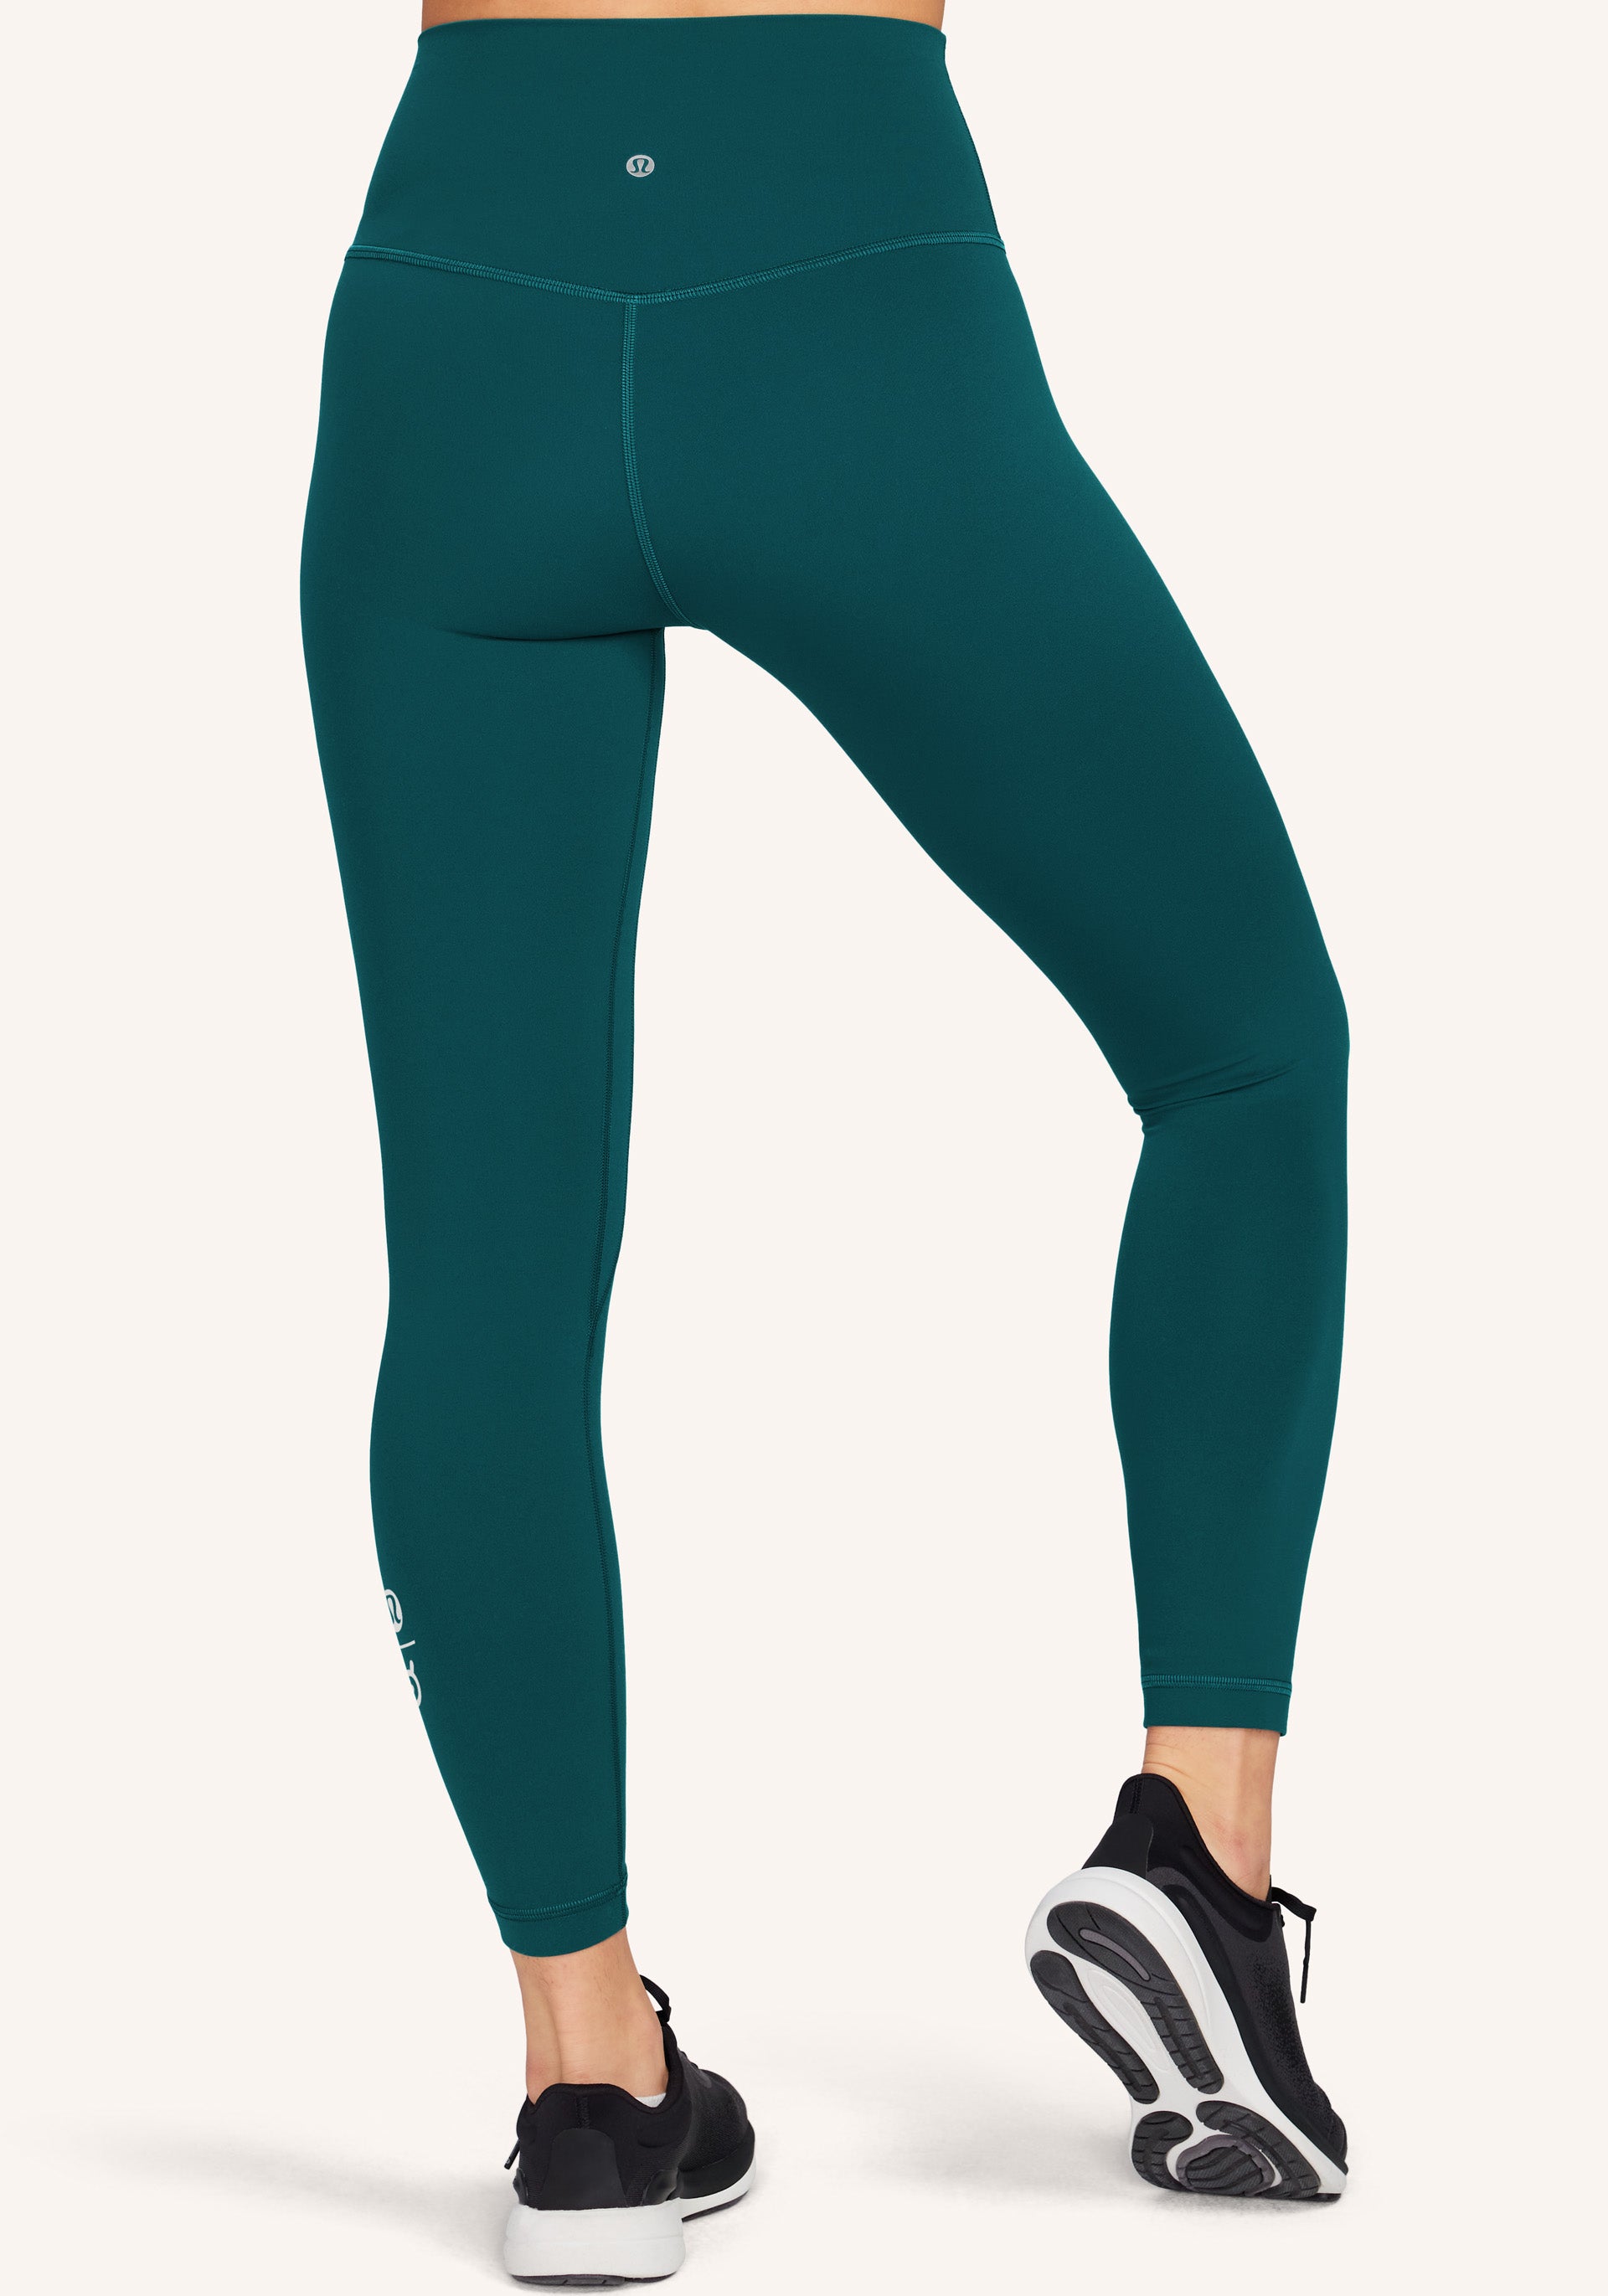 Lululemon super high nulu flared groove pant review-5 - Agent Athletica